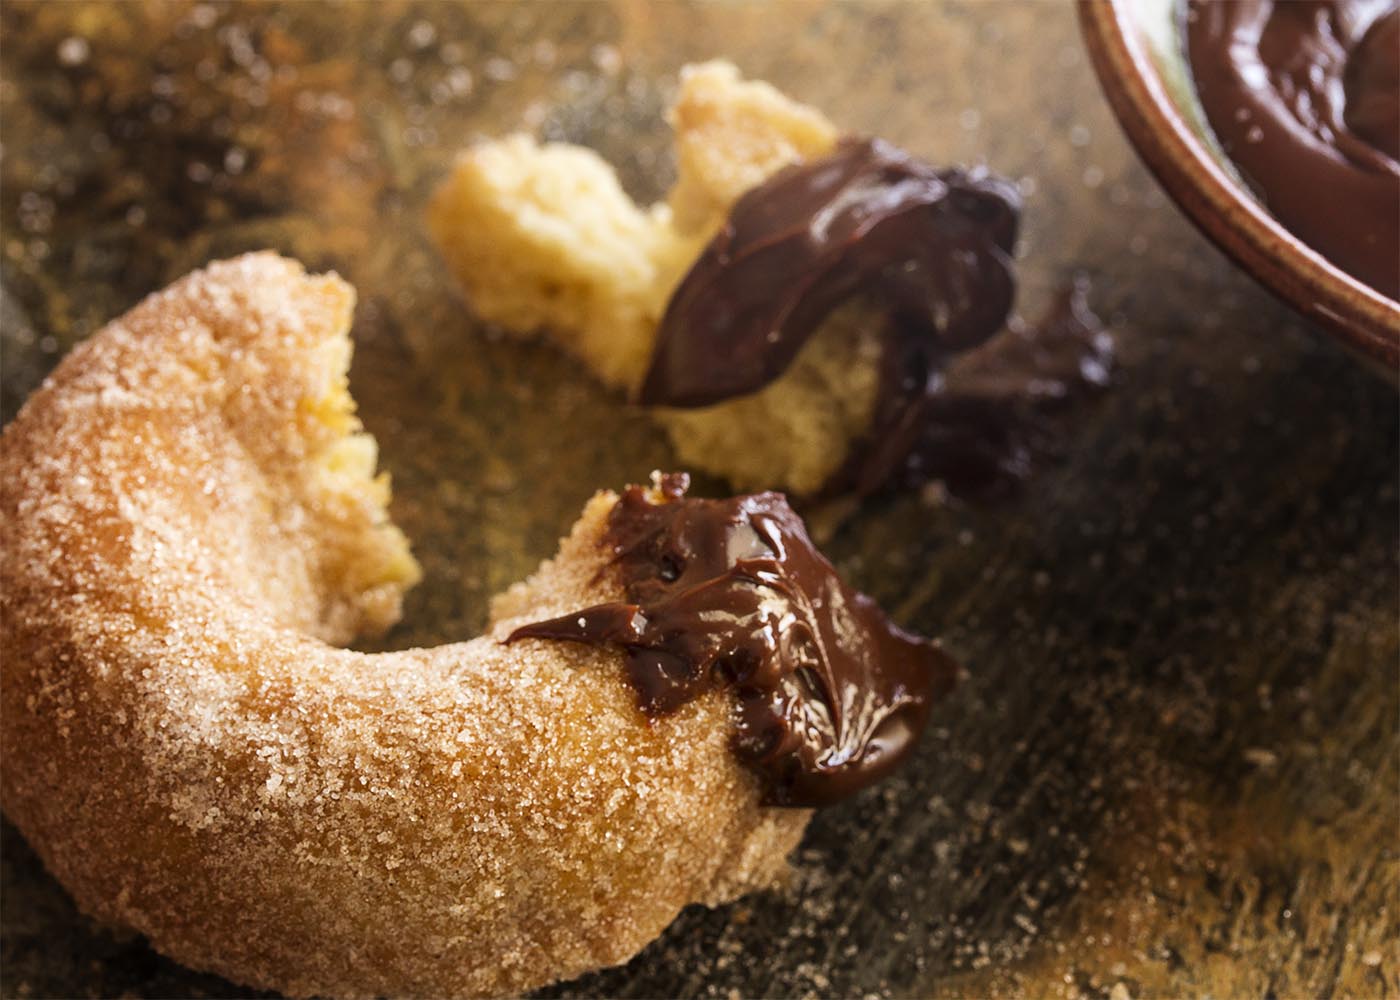 Churros just got a little bit healthier! No deep frying needed. Baked churro donuts are make in a donut pan and rolled in cinnamon sugar. This means you can totally justify the spicy chocolate sauce to dip them in. | justalittlebitofbacon.com